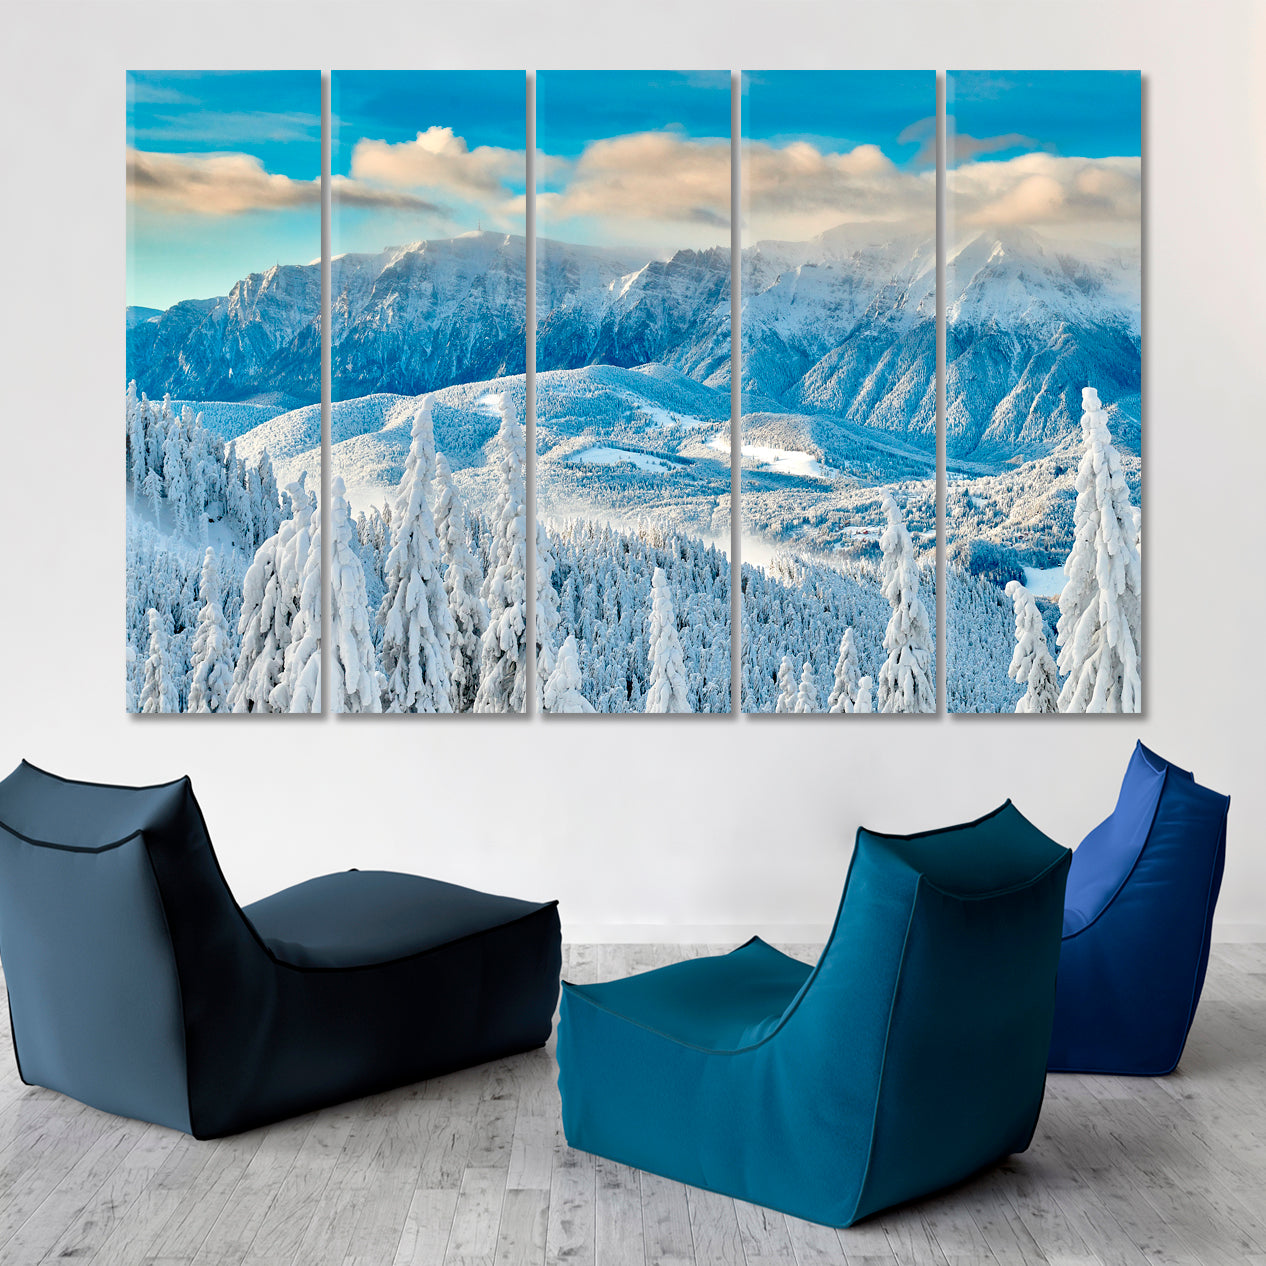 Mountain Winter Landscape Over The Ski Slope Panoramic View Poster Scenery Landscape Fine Art Print Artesty 5 panels 36" x 24" 